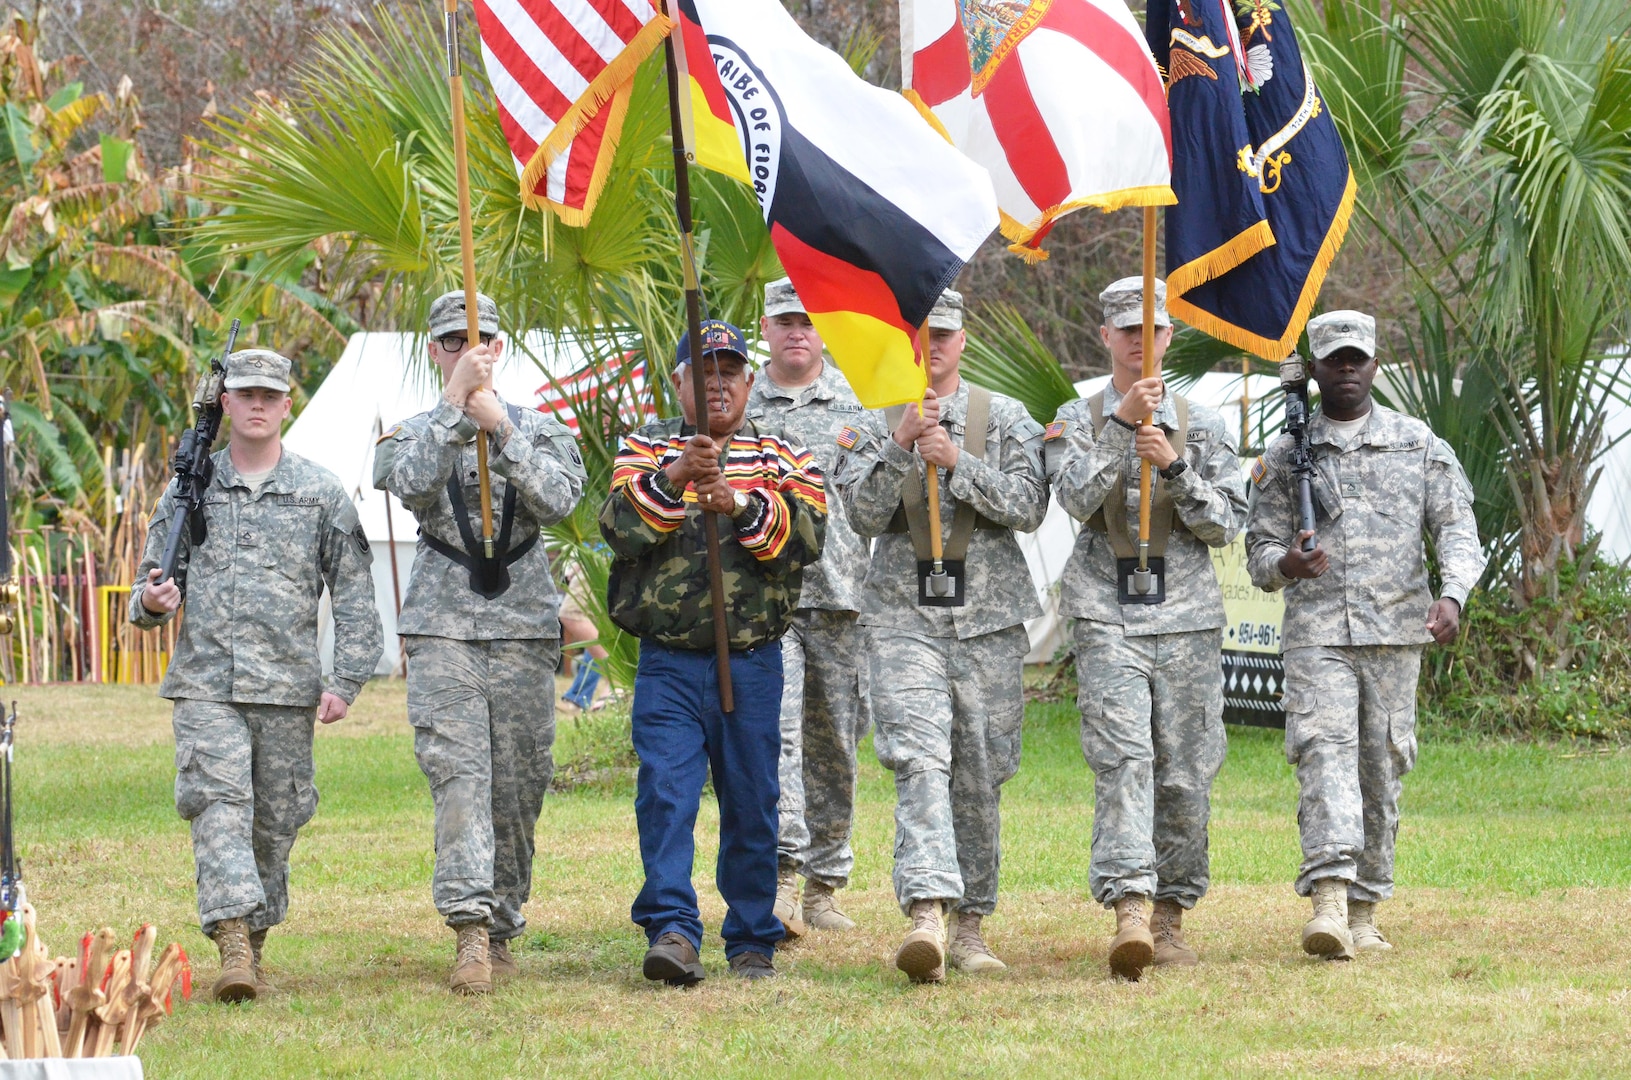 Florida Army National Guard Soldiers from 2nd Battalion, 124th Infantry Regiment, present a joint color guard with a member of the Seminole Tribe of Florida during a ceremony at the reenactment of the Battle of Okeechobee in Okeechobee, Fla., Feb. 28, 2015. 